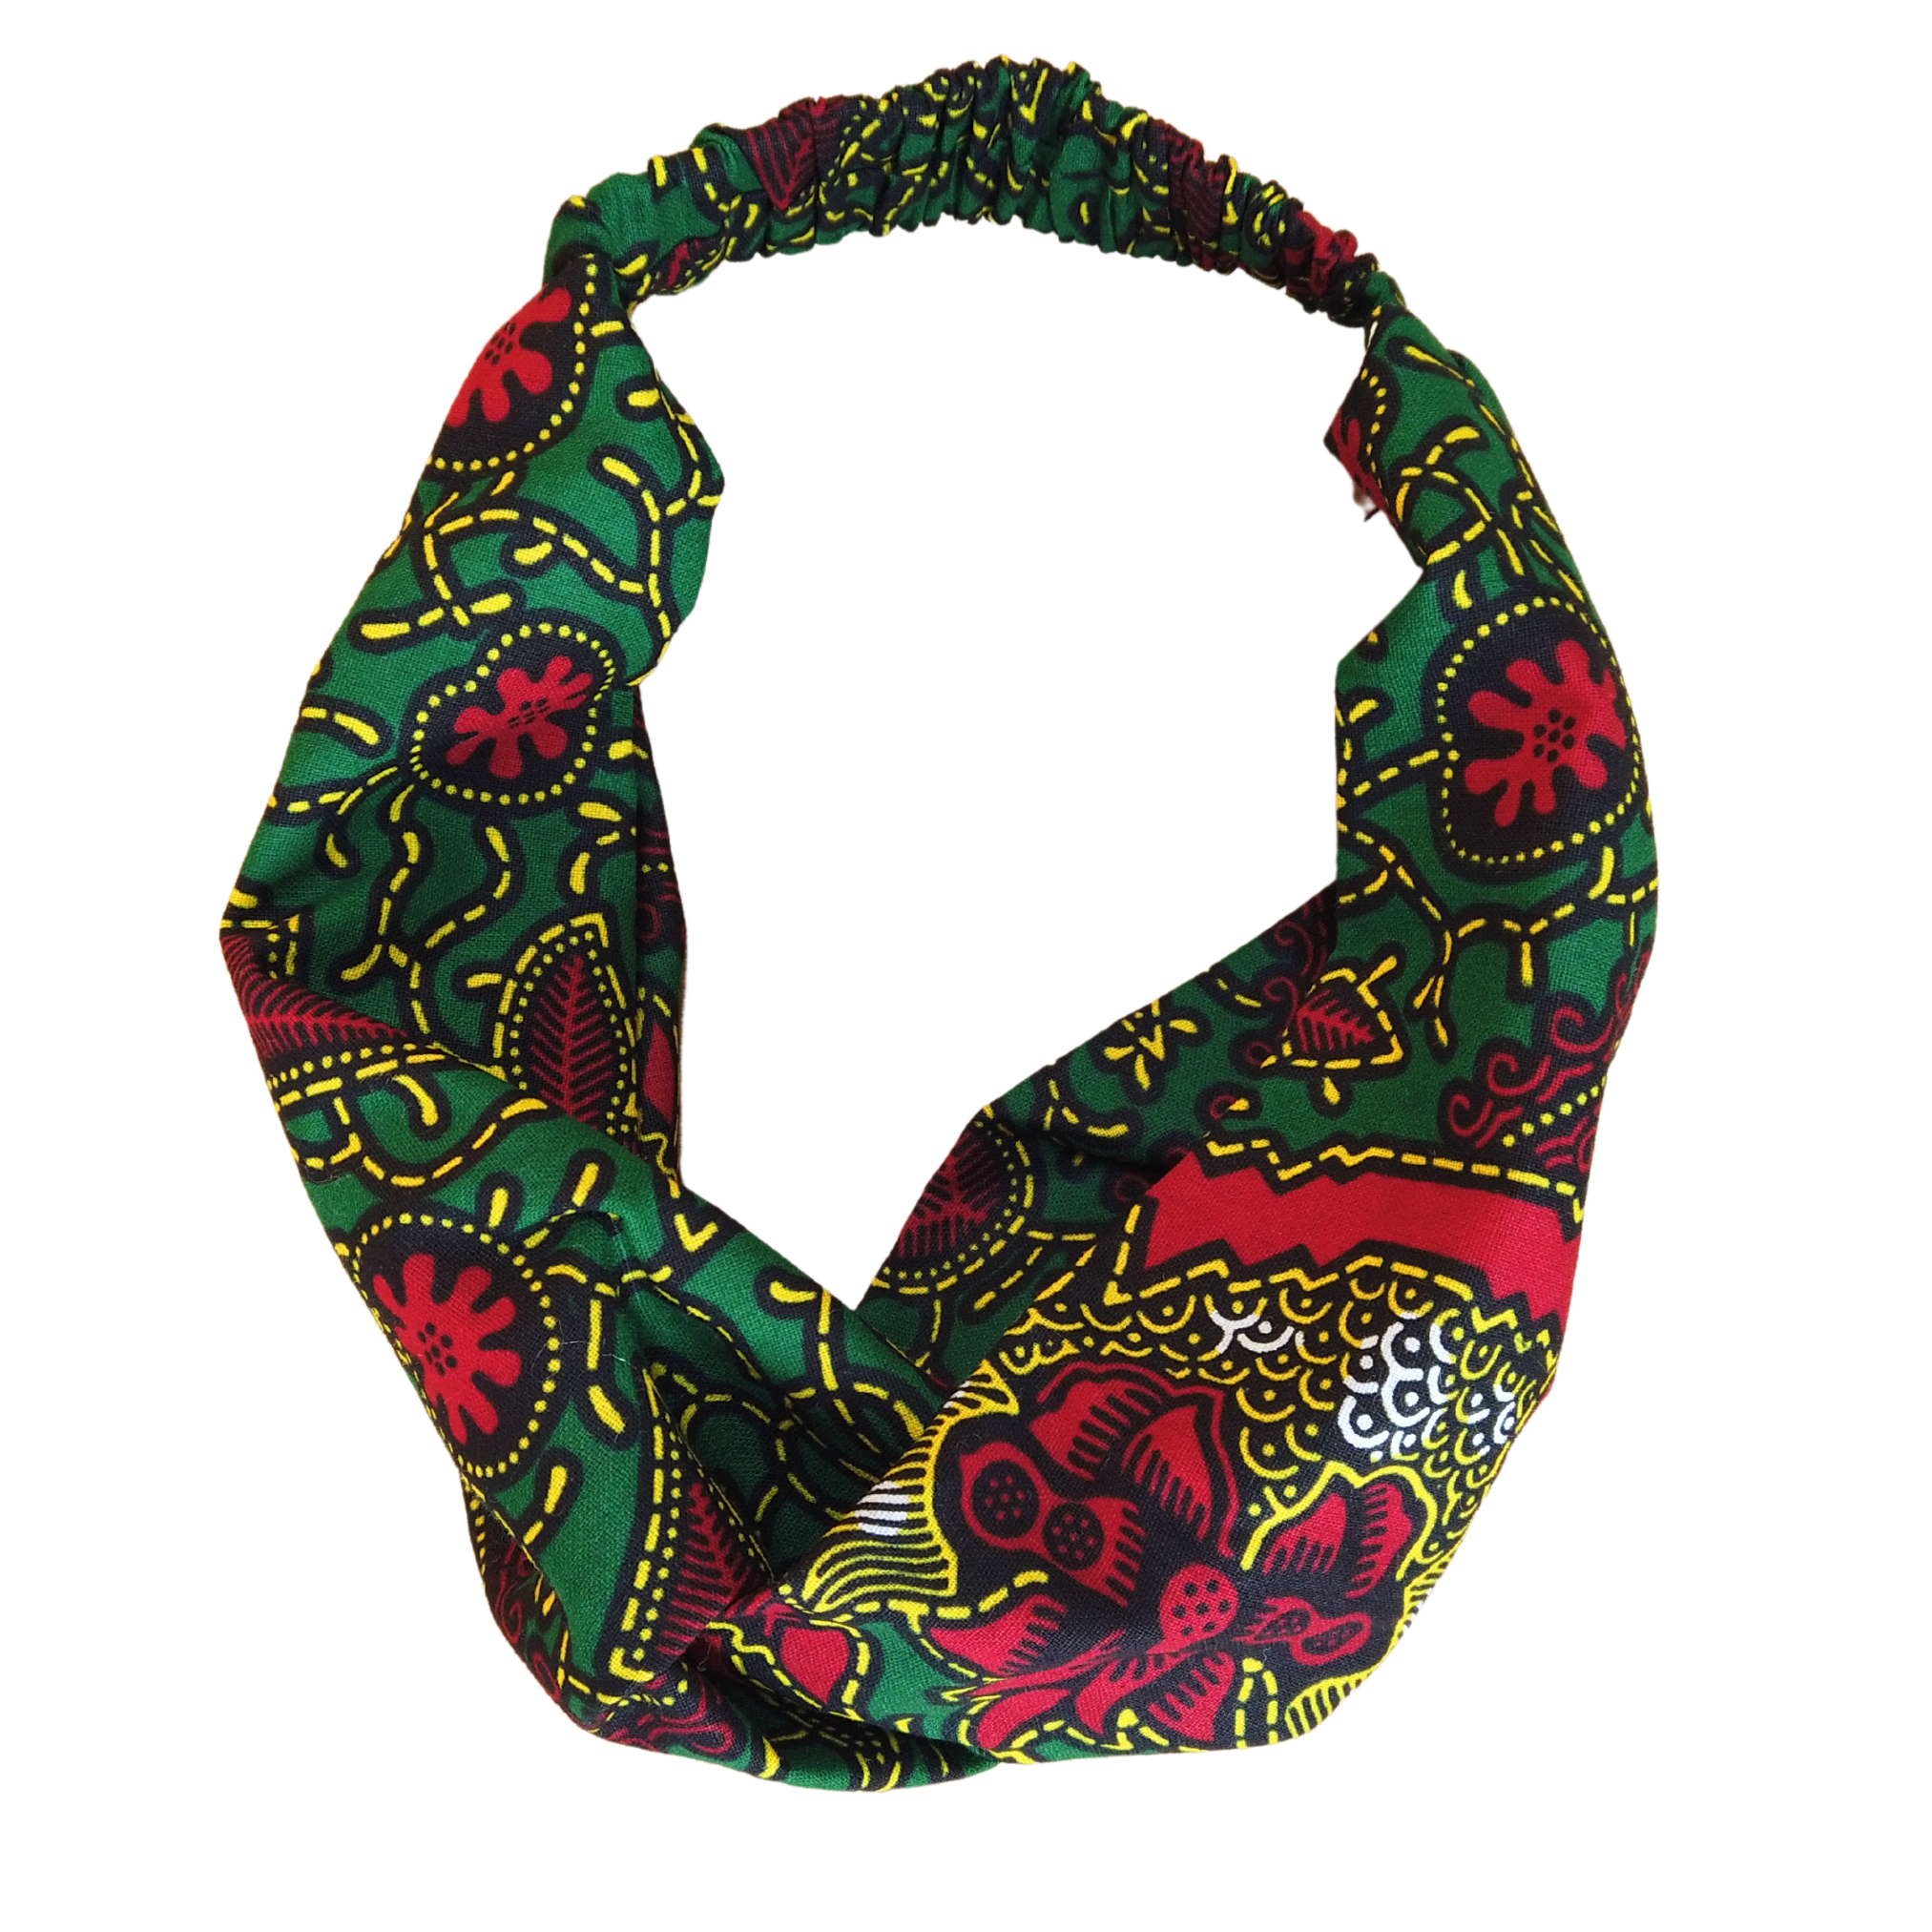 African Print Headband Ankara Handmade Top Knot Green Elasticated Stretchy Wide Large Cotton by Dovetailed